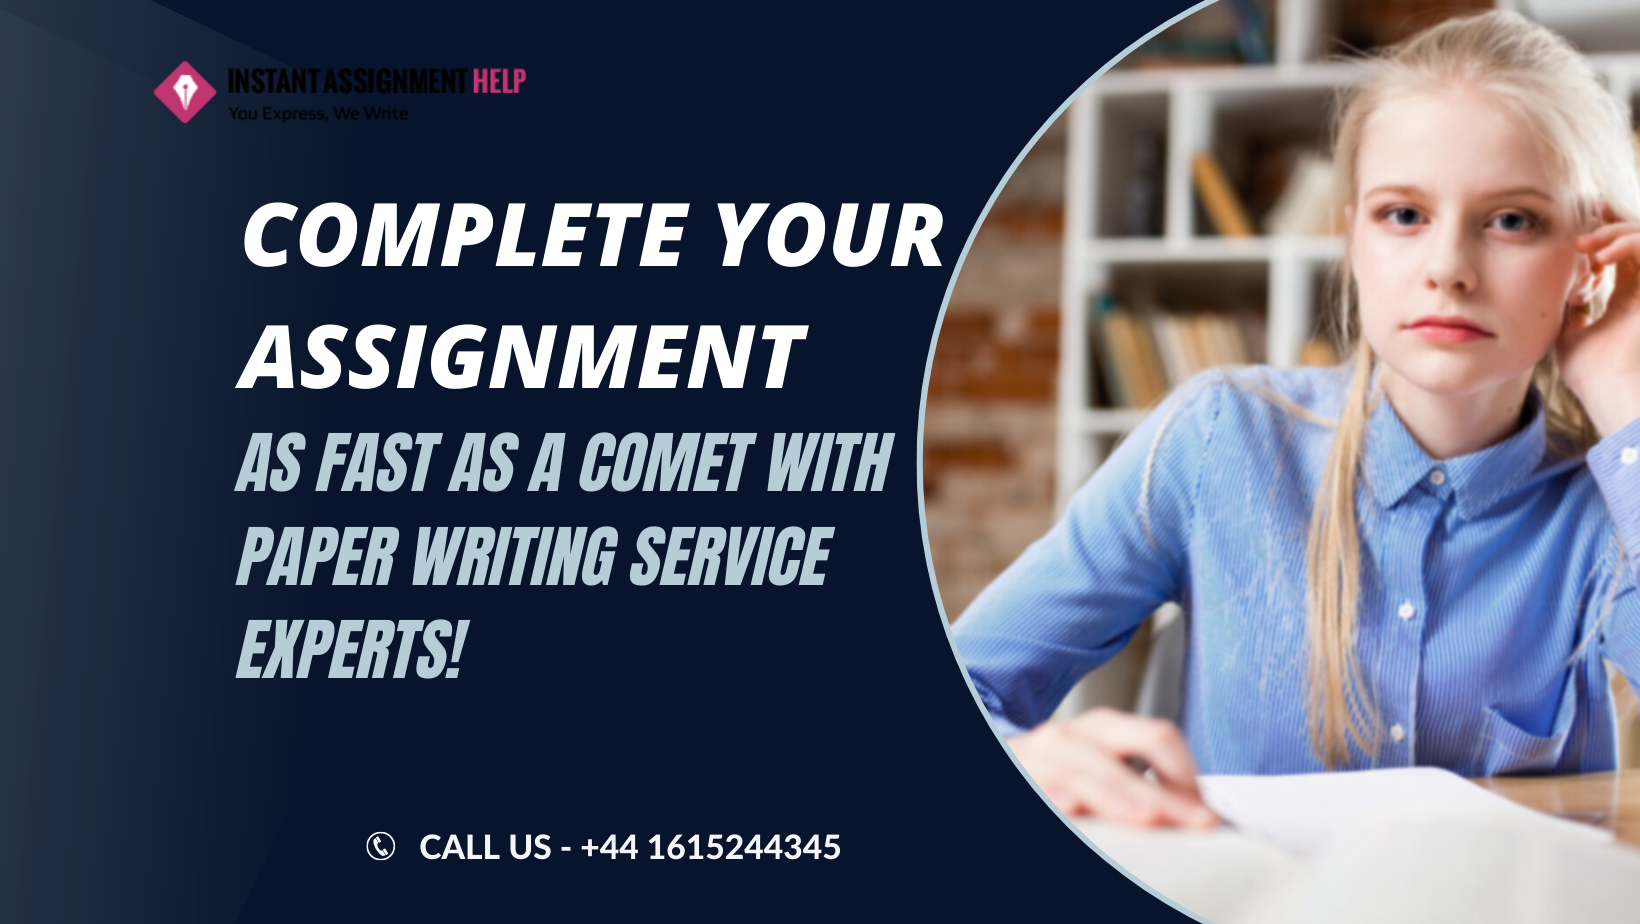 Get paper writing service online